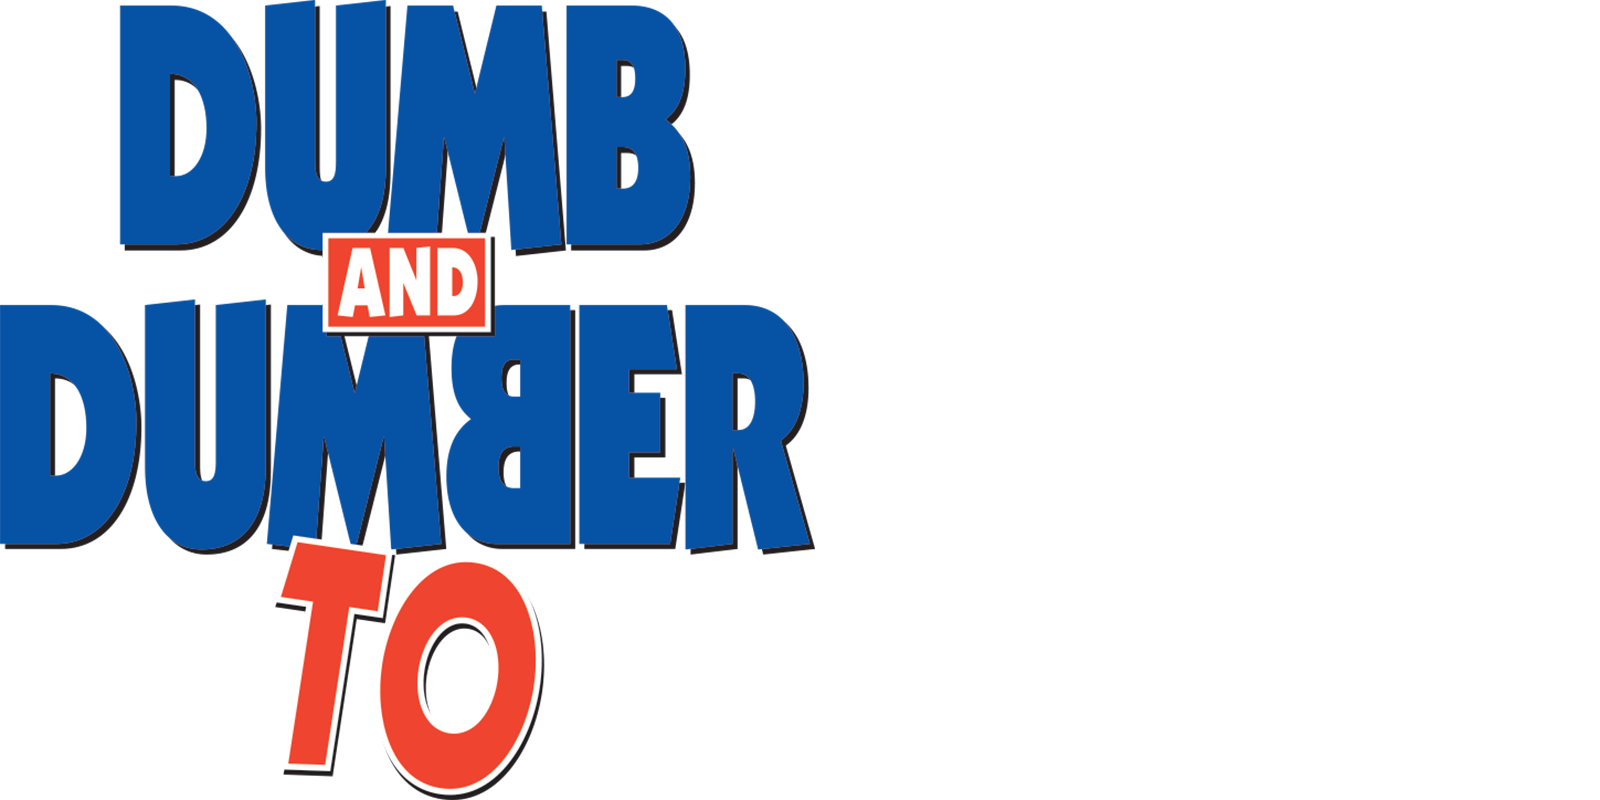 watch dumb and dumber 2 free online spanish